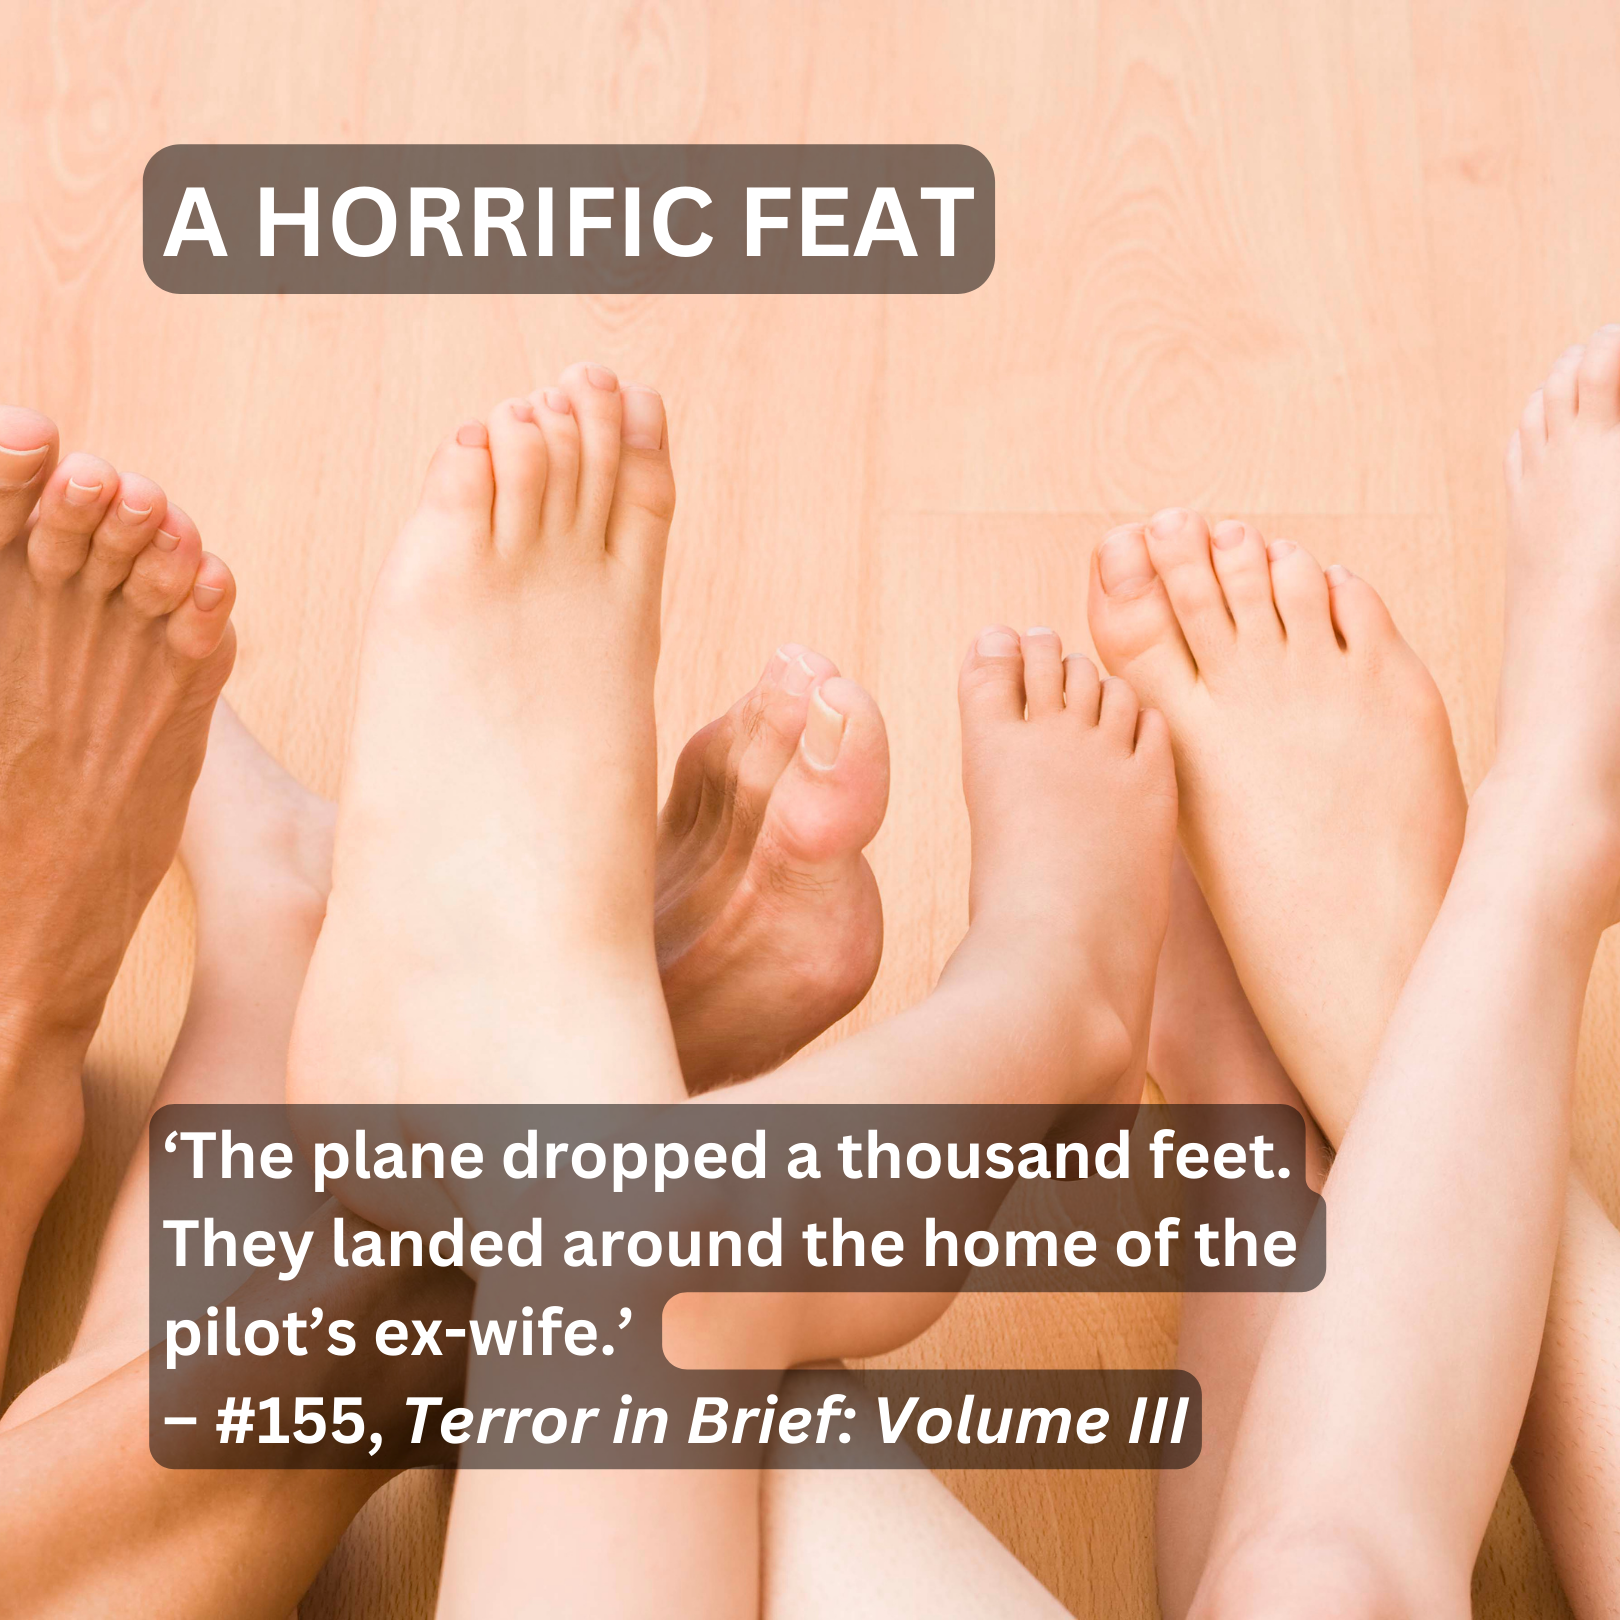 A Horrific Feat from Terror in Brief: Volume III